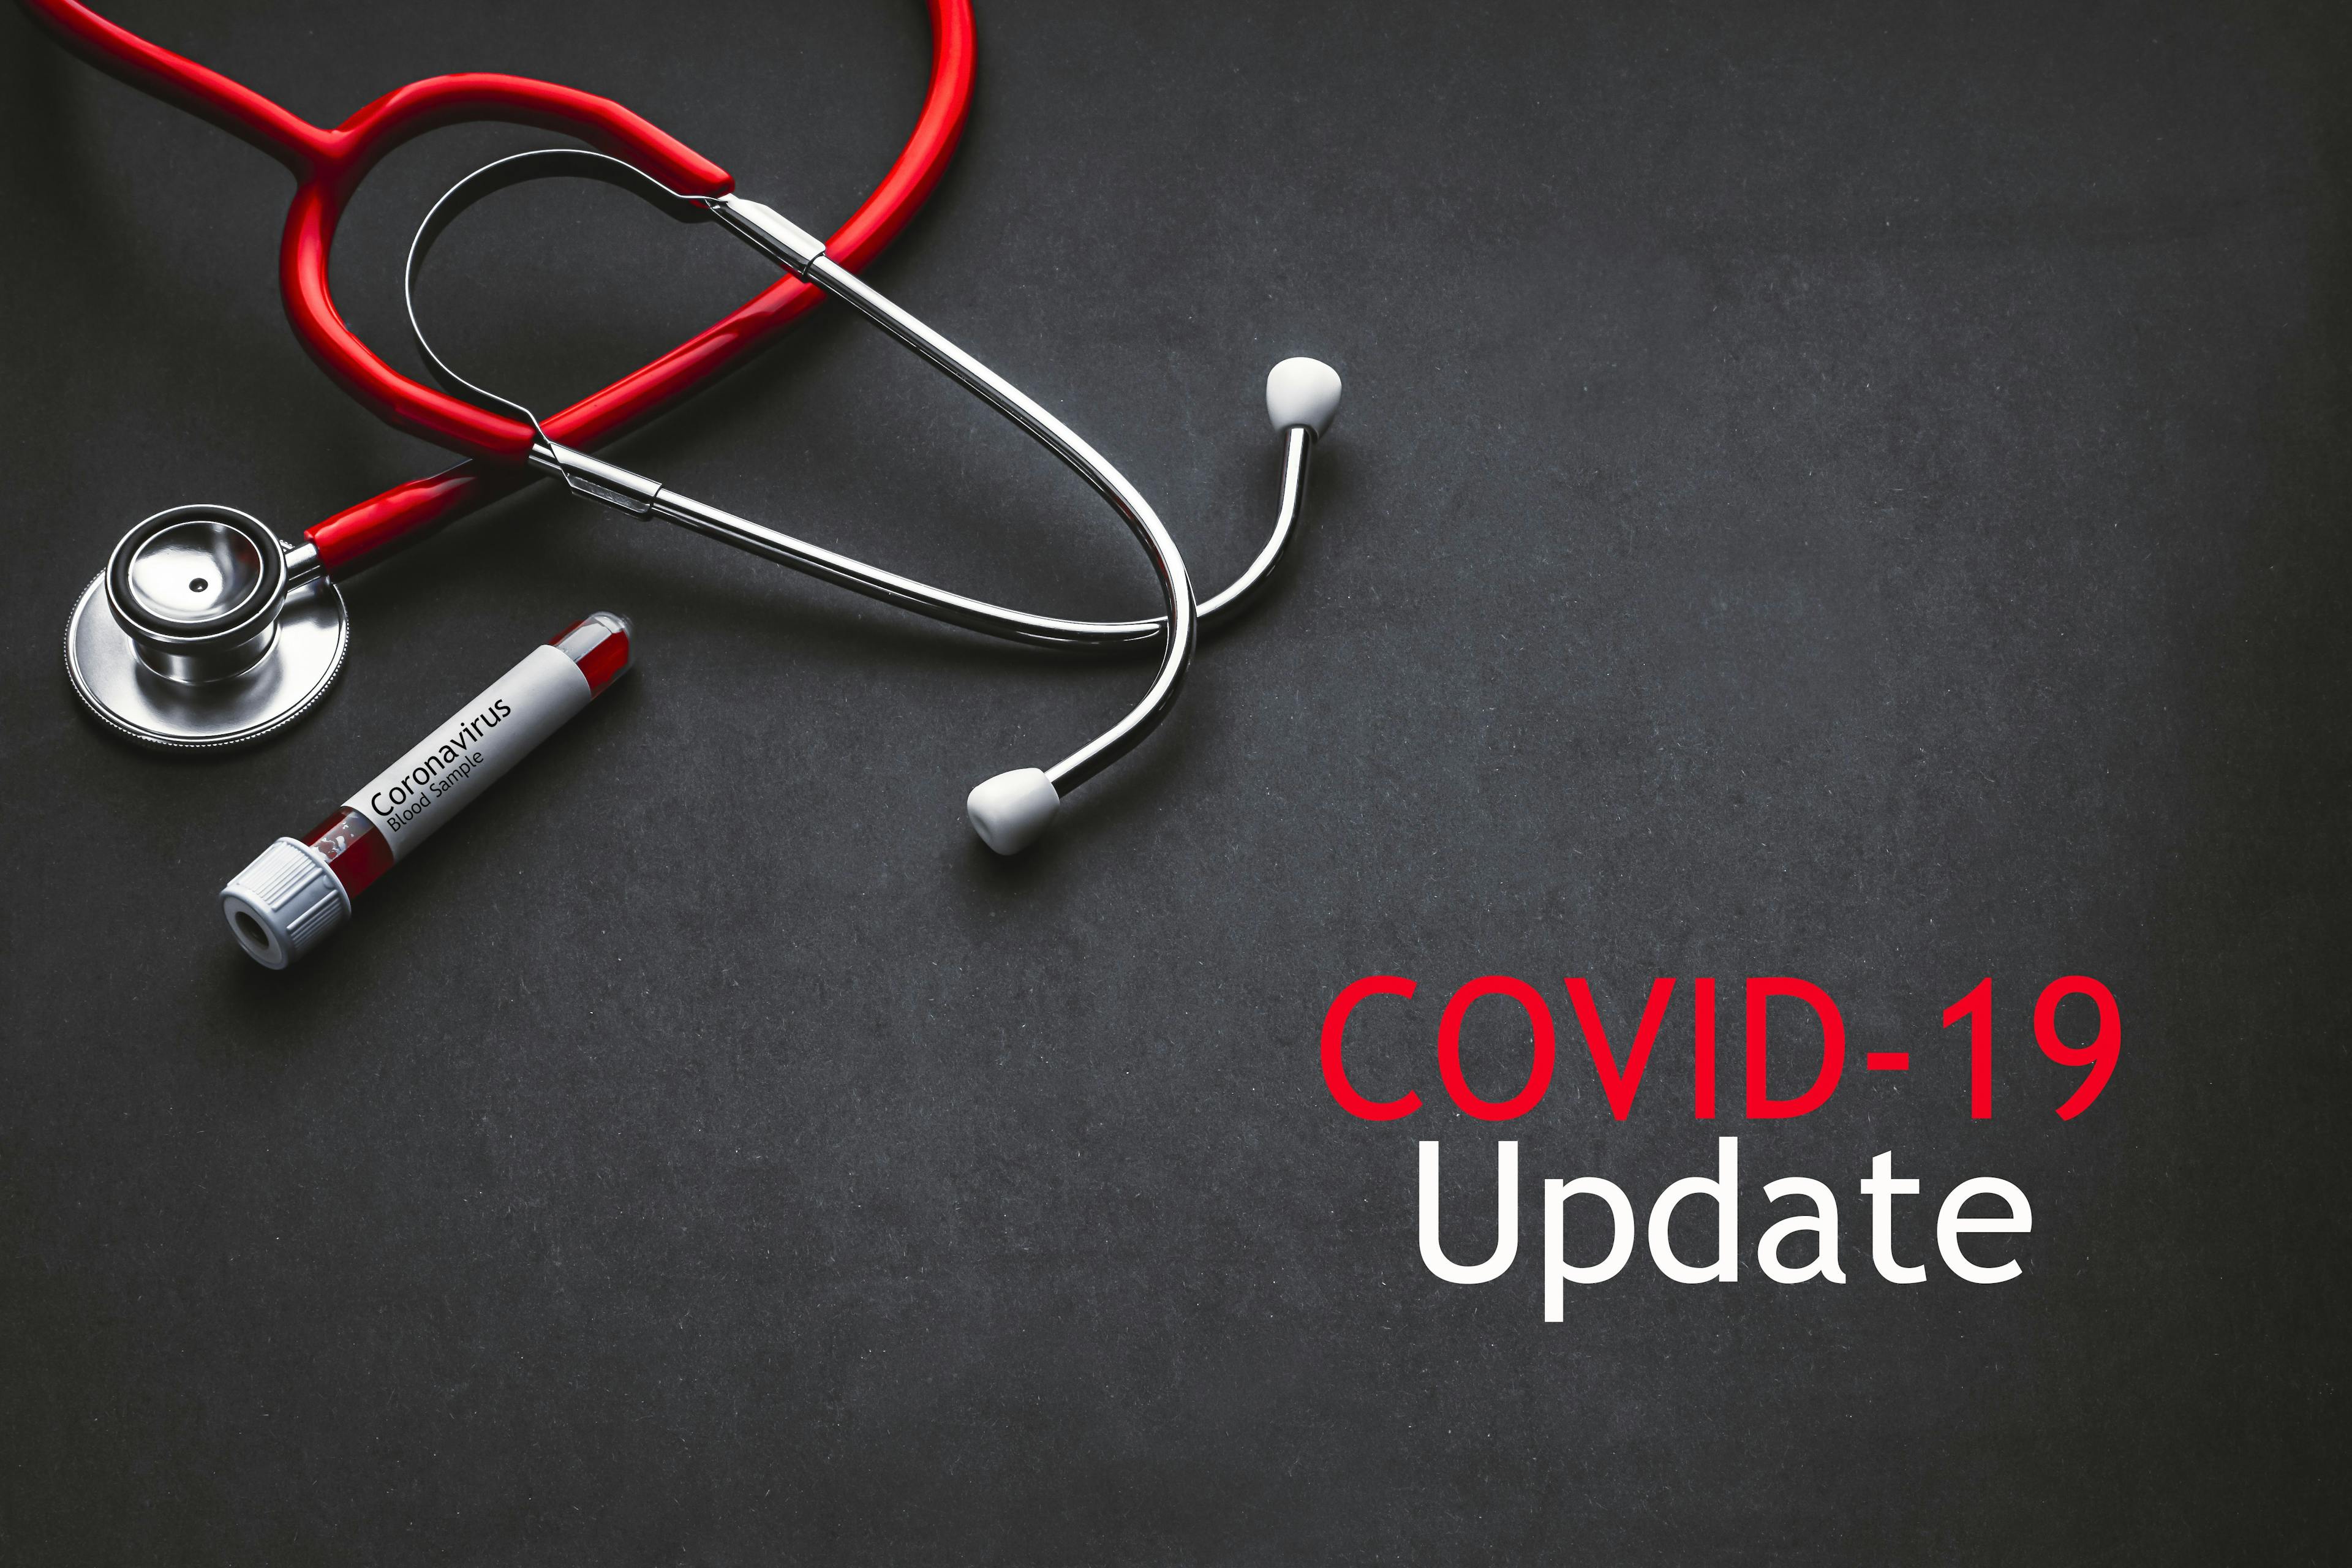 COVID-19 Update: Global Cases and Recoveries as of June 19, 2020